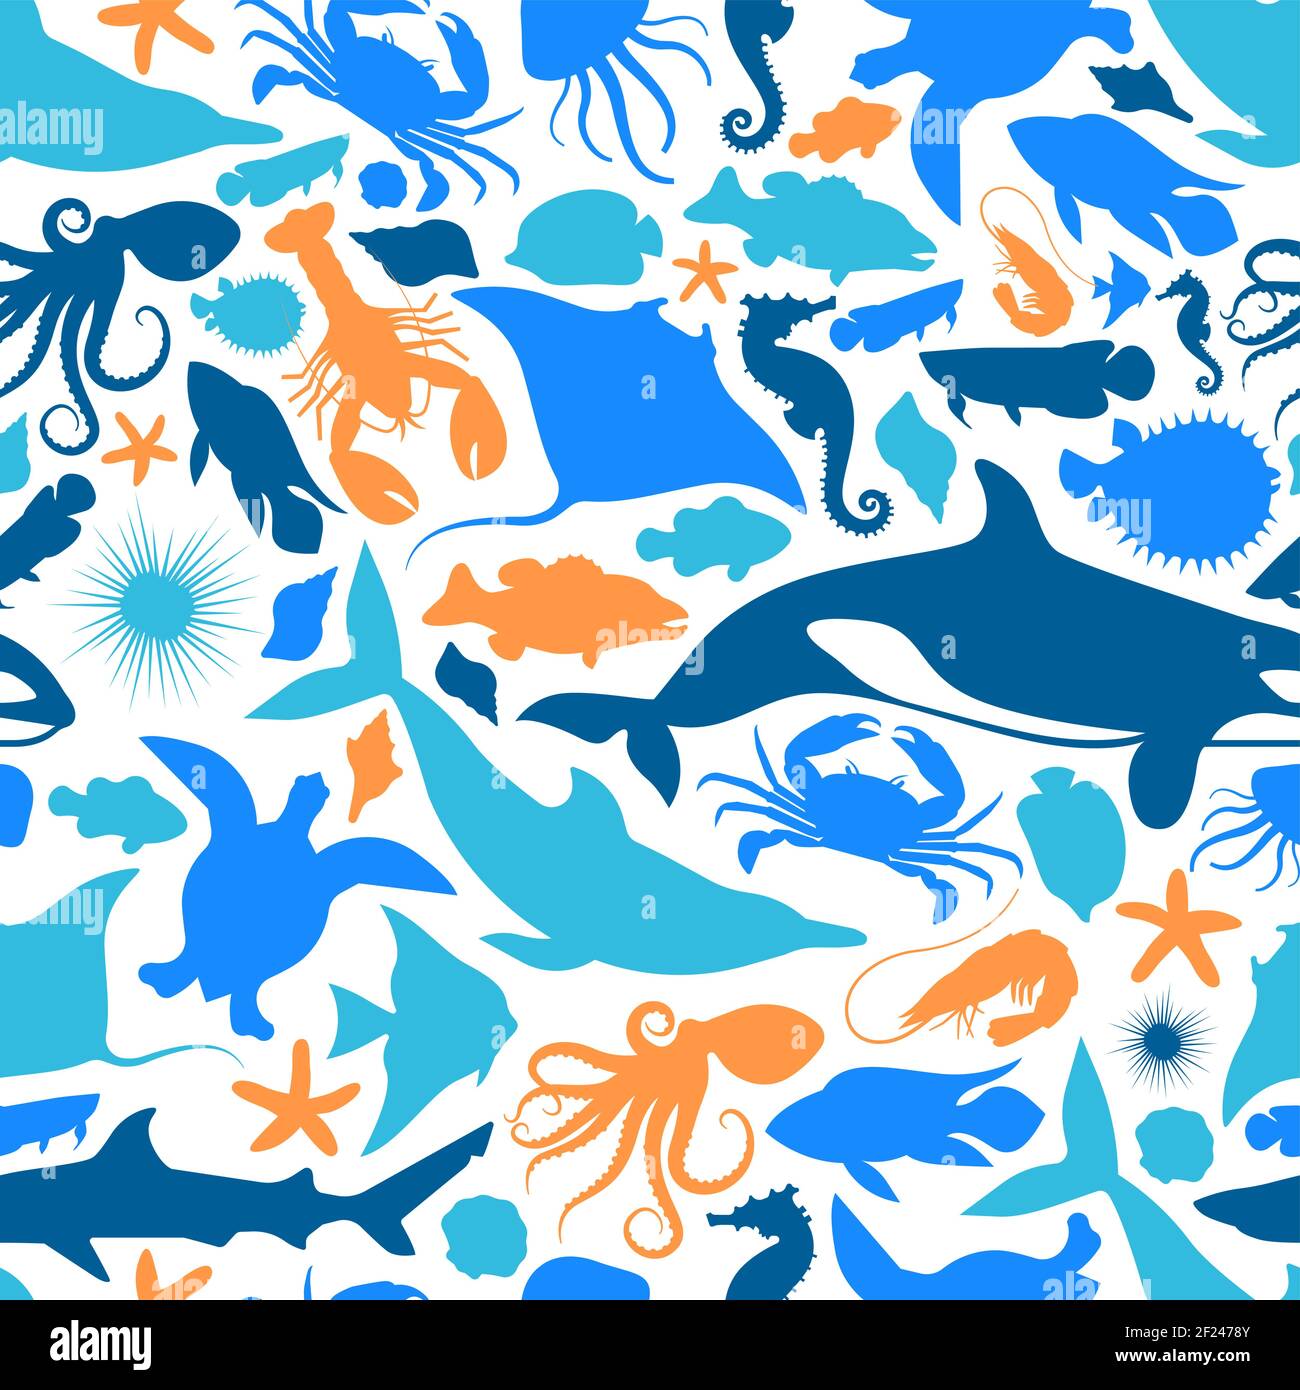 Wild water animal icon seamless pattern illustration. Blue marine animals silhouette background for aquatic sea life diversity concept or coral reef p Stock Vector